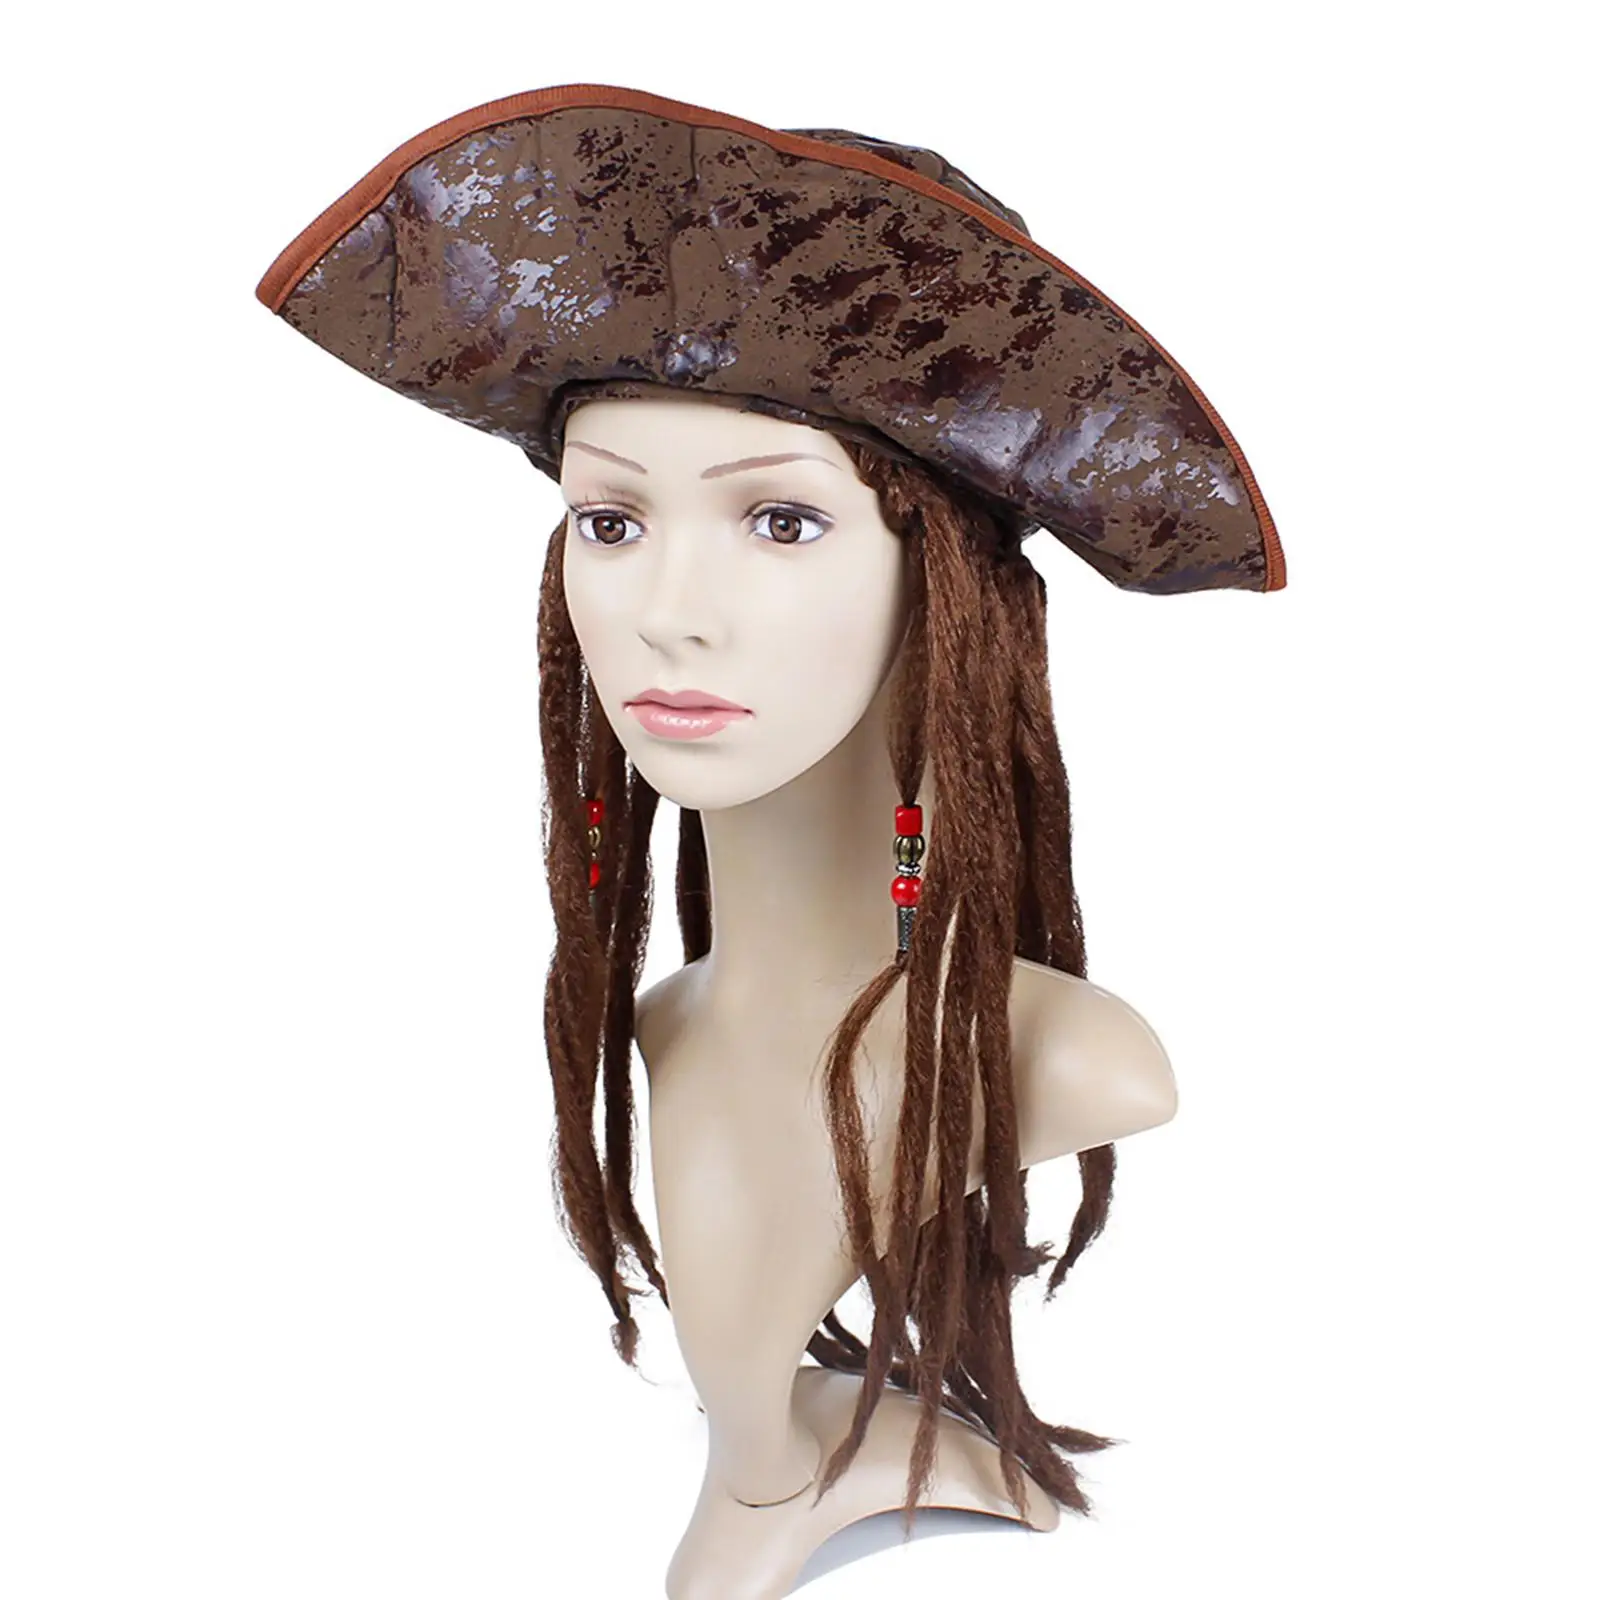 Faux Leather Pirate Hat with Wig captains Costume Cap for Fancy Dress Events Play Games of Adventure and Mischief Men